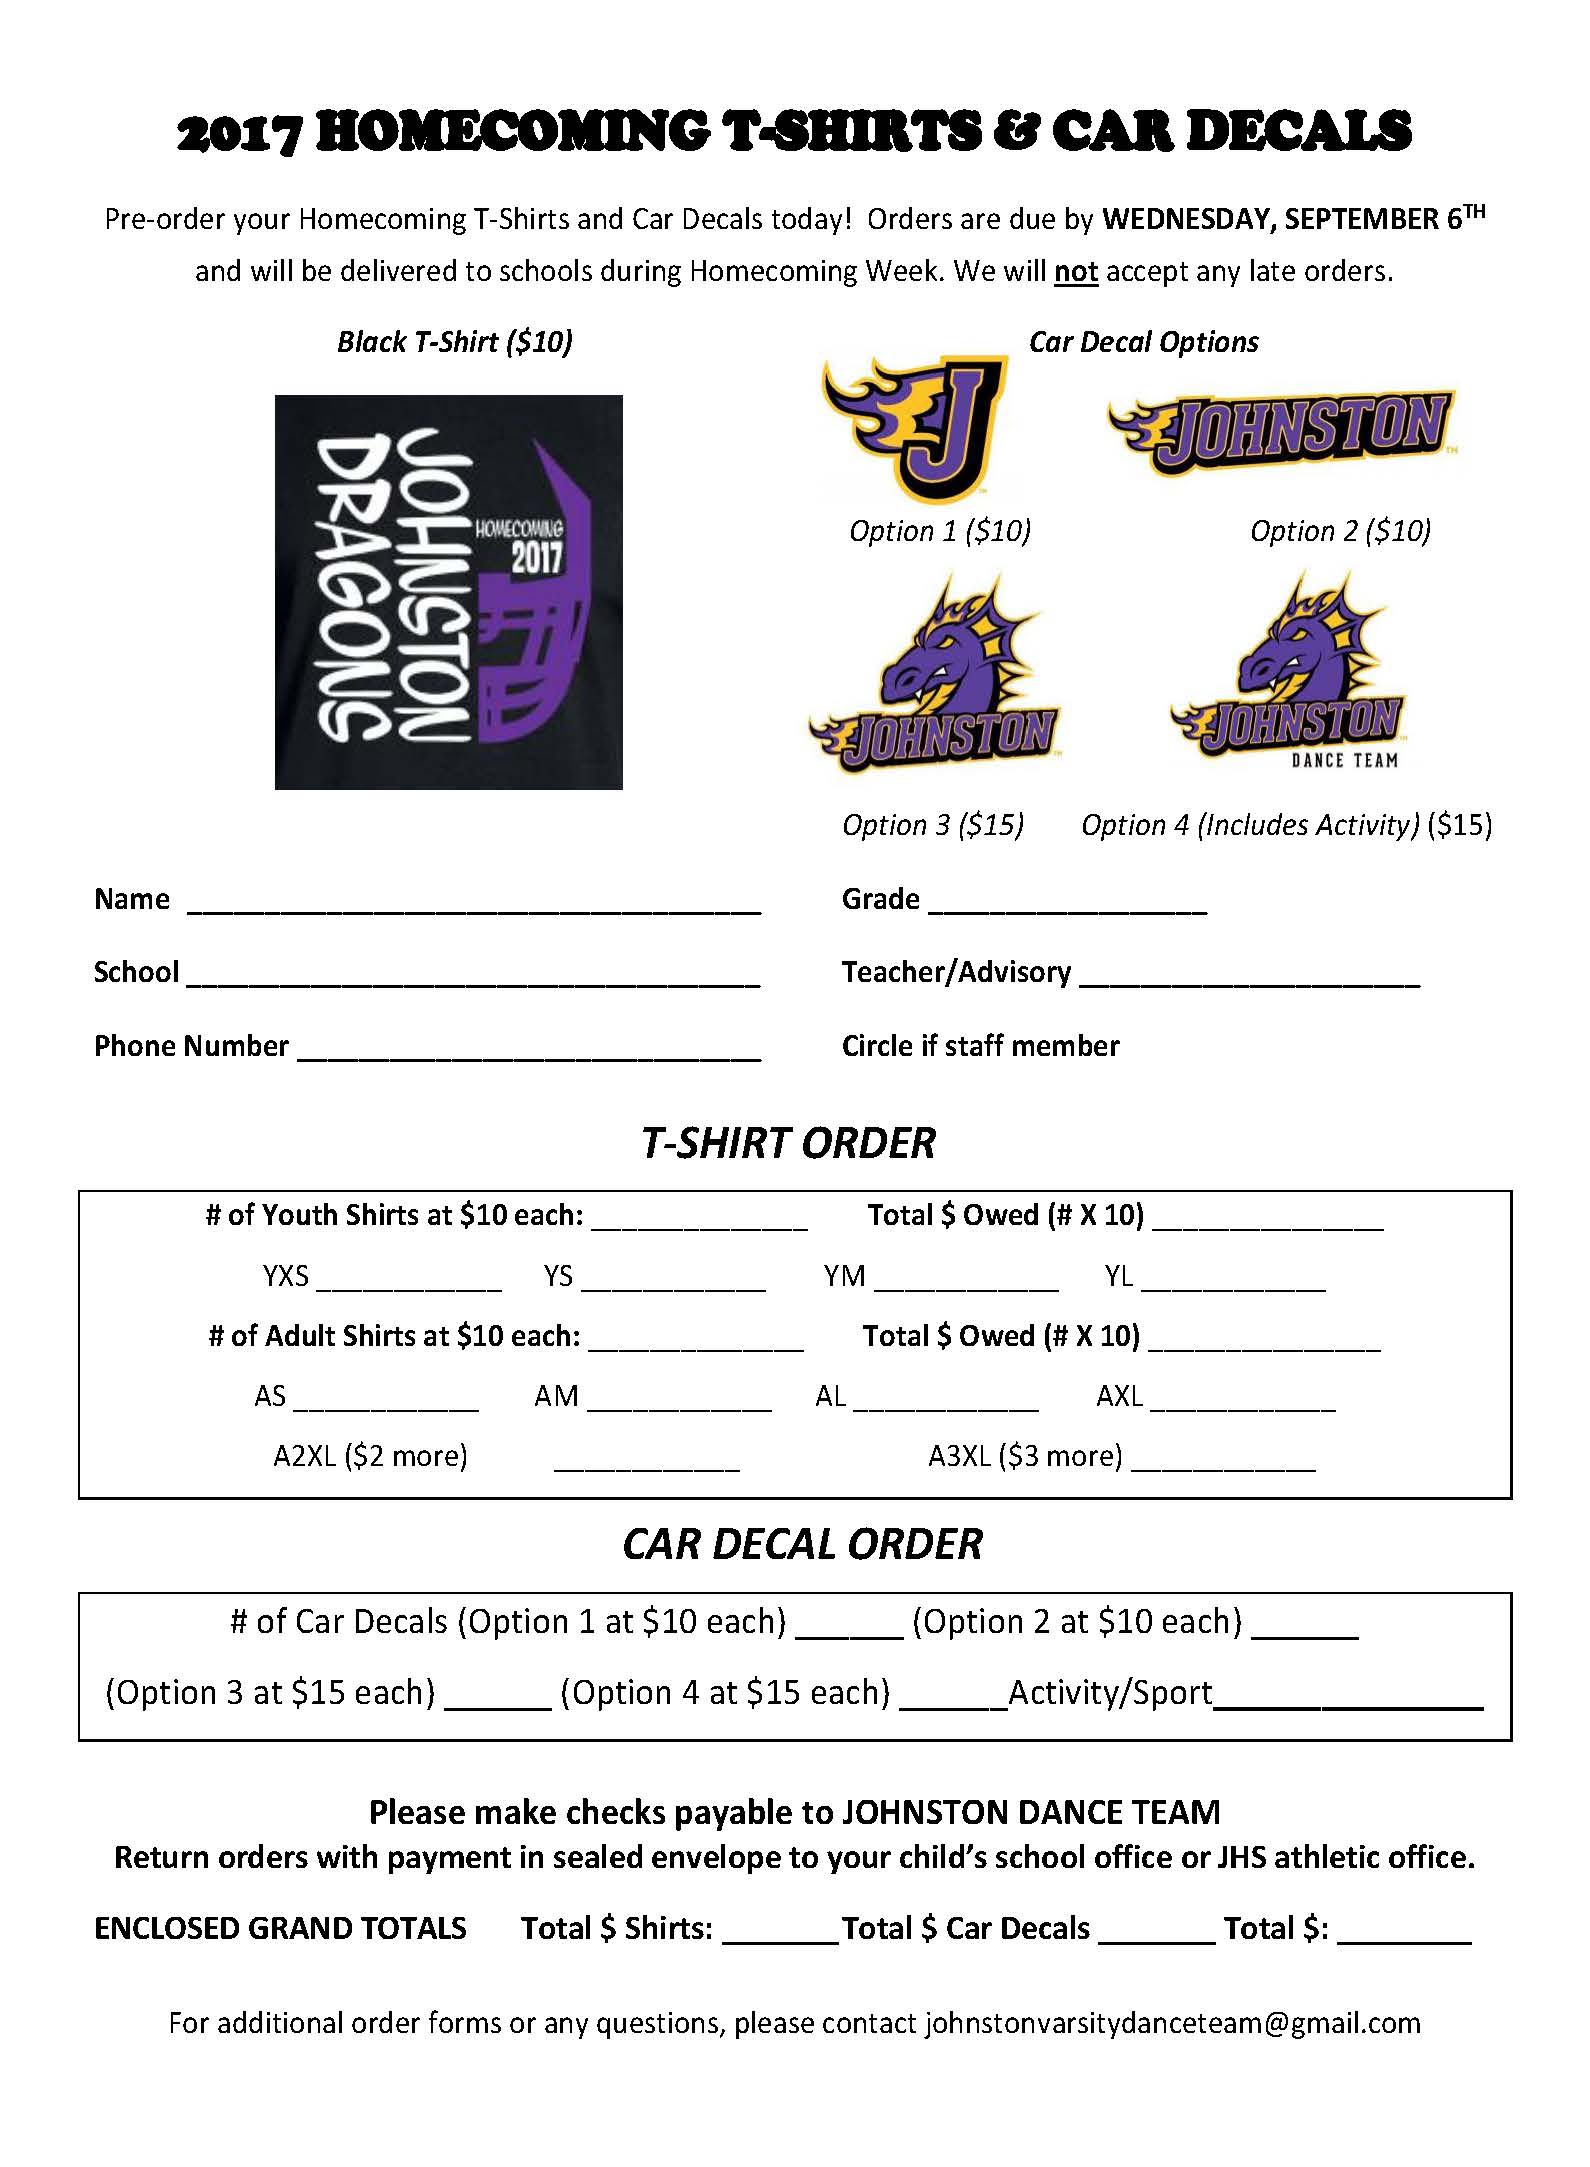 Order form for Homecoming T Shirts and Decals 2017